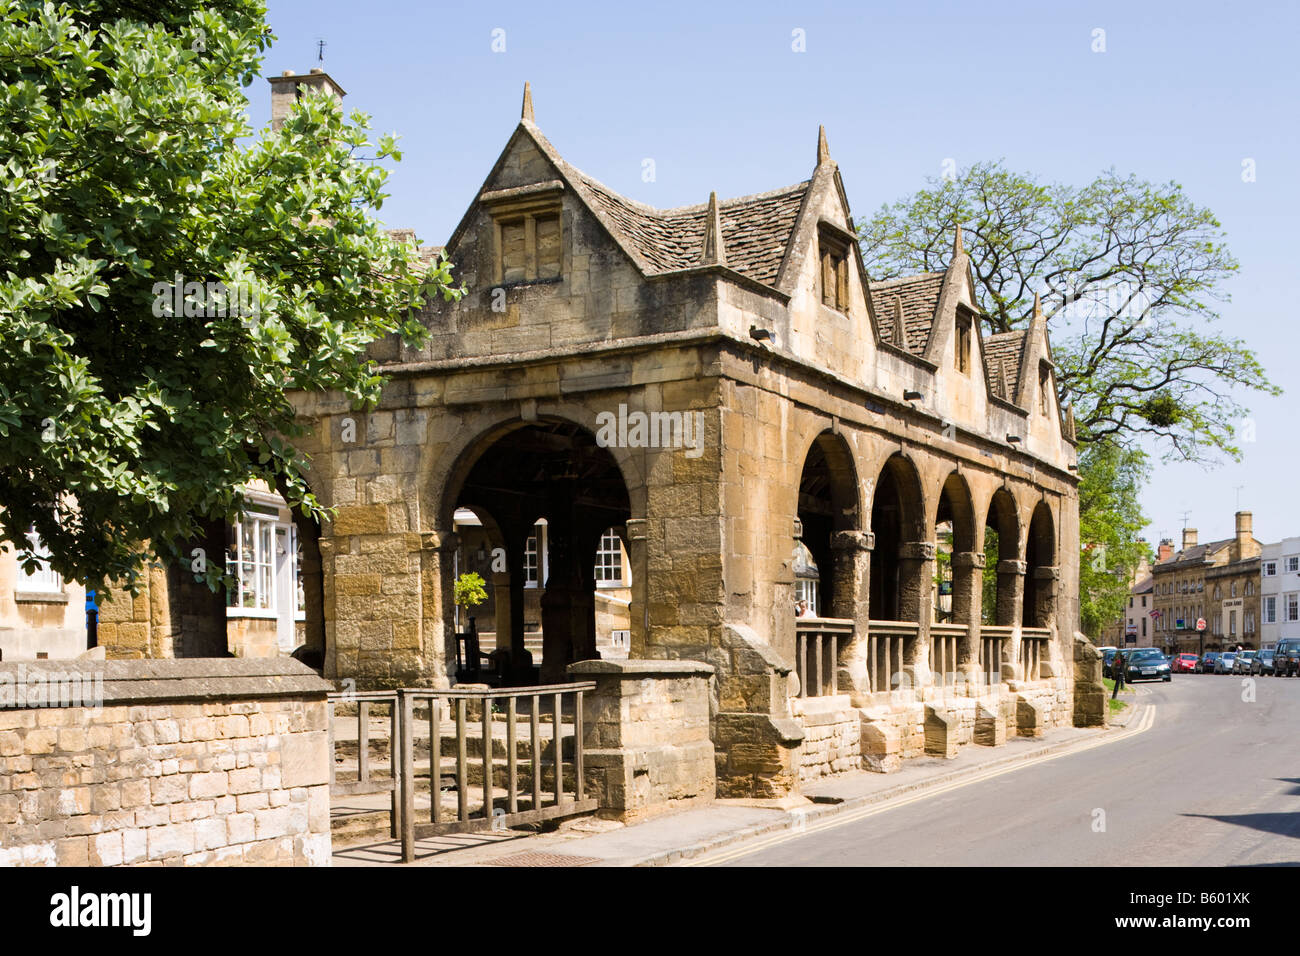 The Market House built in 1627 by Sir Baptist Hicks for selling butter in the Cotswold town of Chipping Campden, Gloucestershire Stock Photo